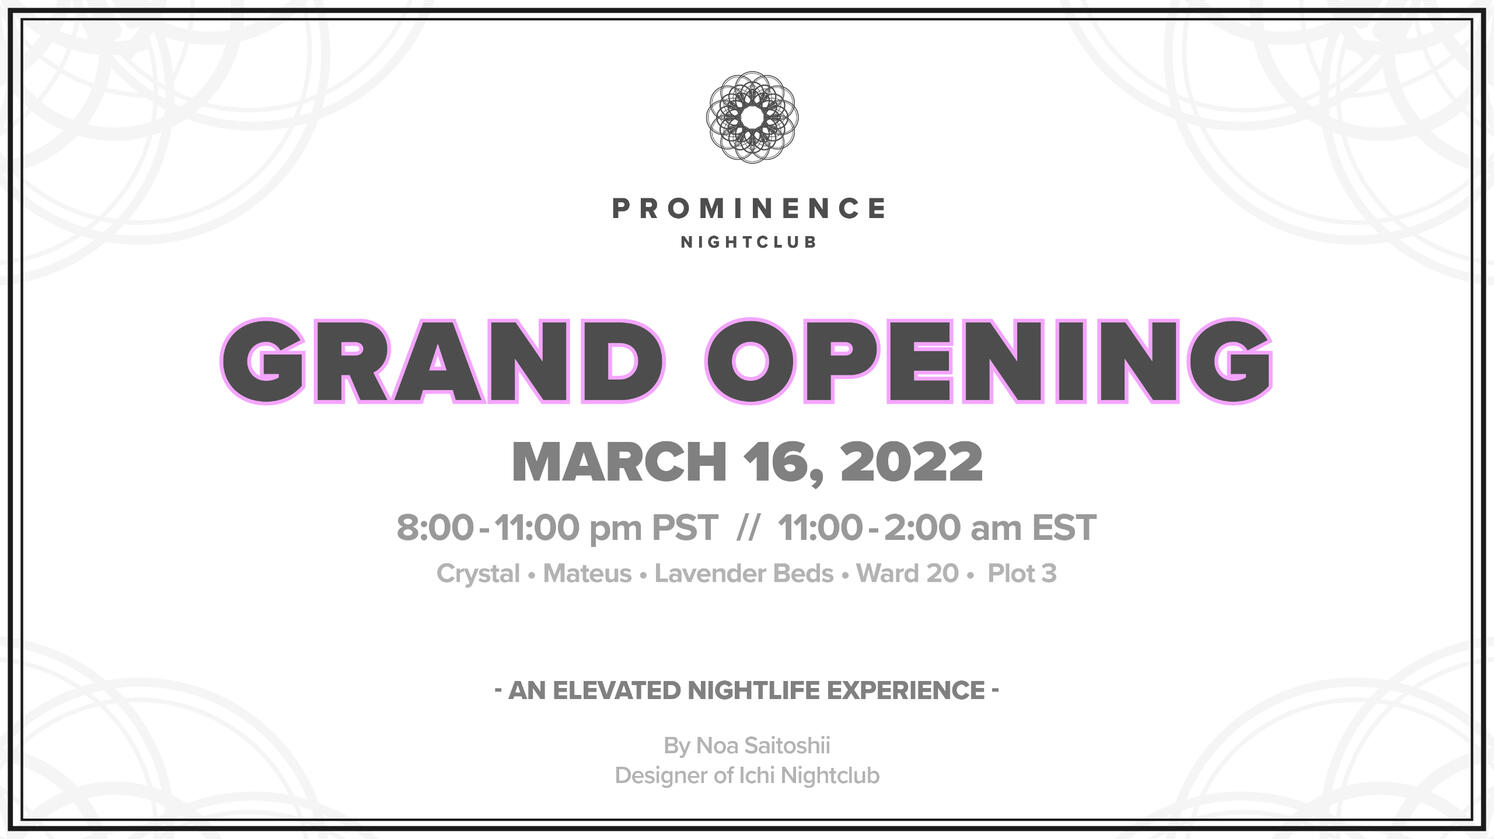 Grand Opening: March 16